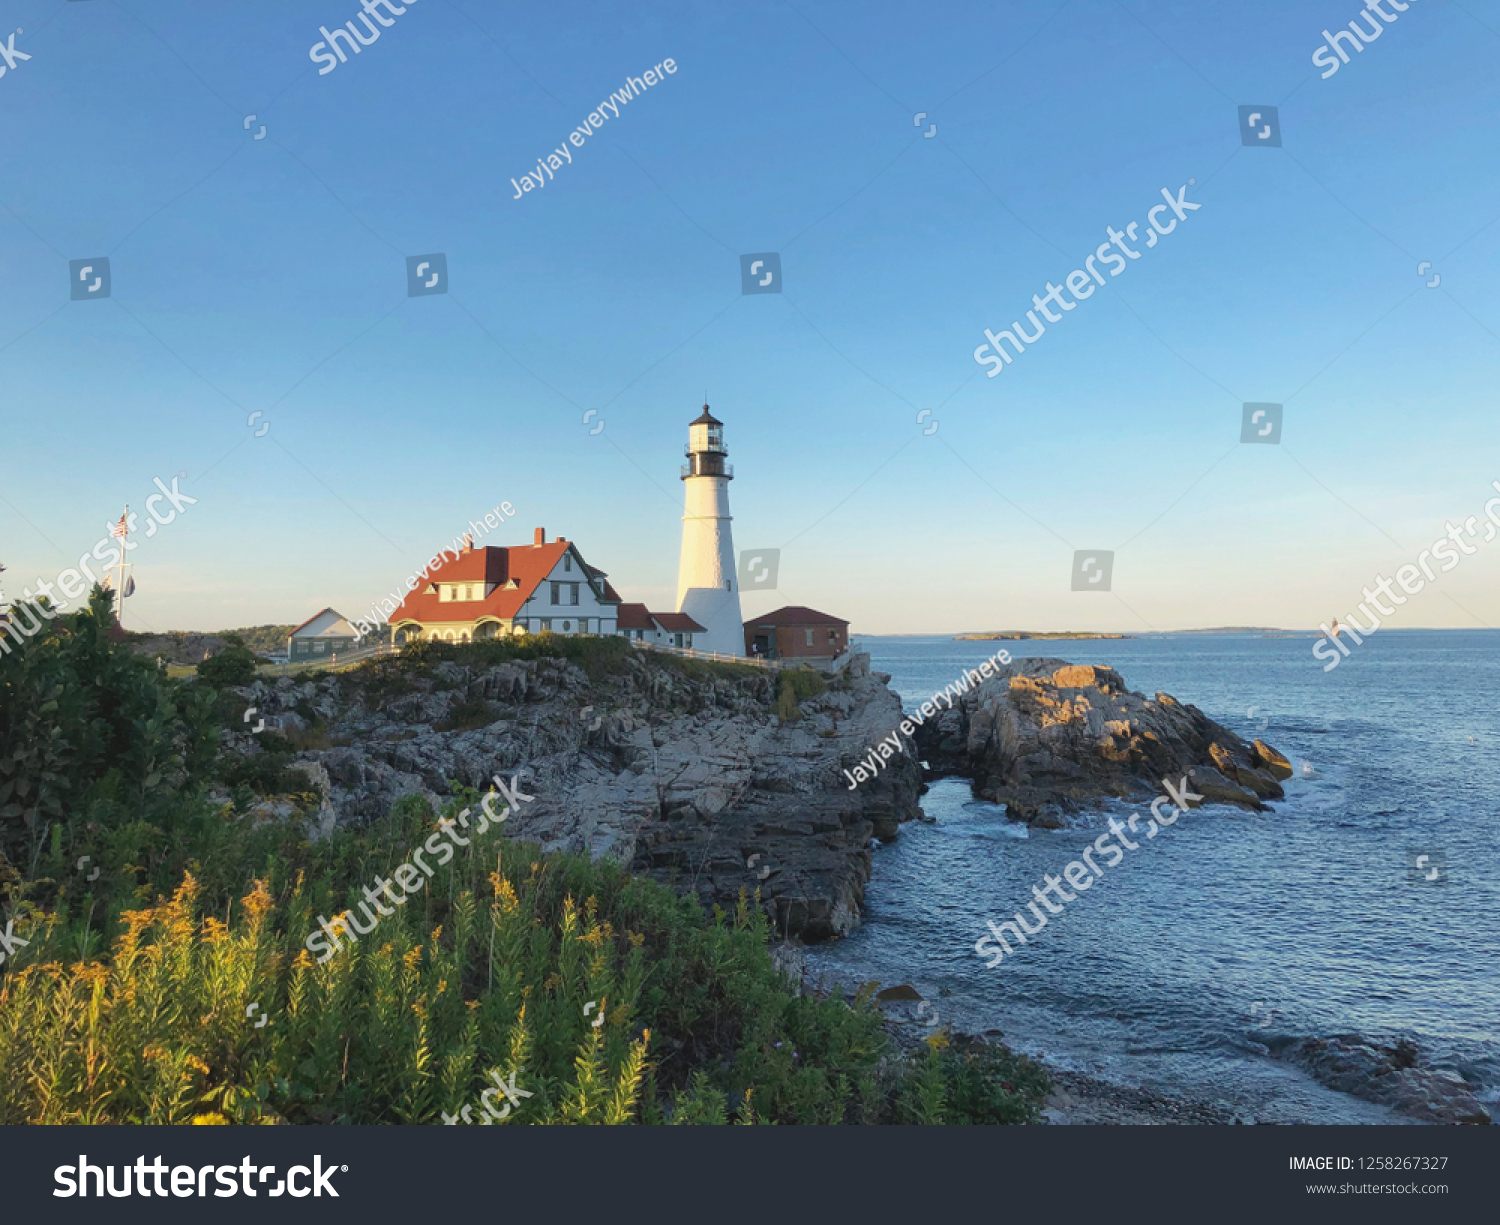 when i was in Usa. i had travel in maine state this lighthouse Portland. i would've said it's So lovely.... can't wait to back again. #1258267327